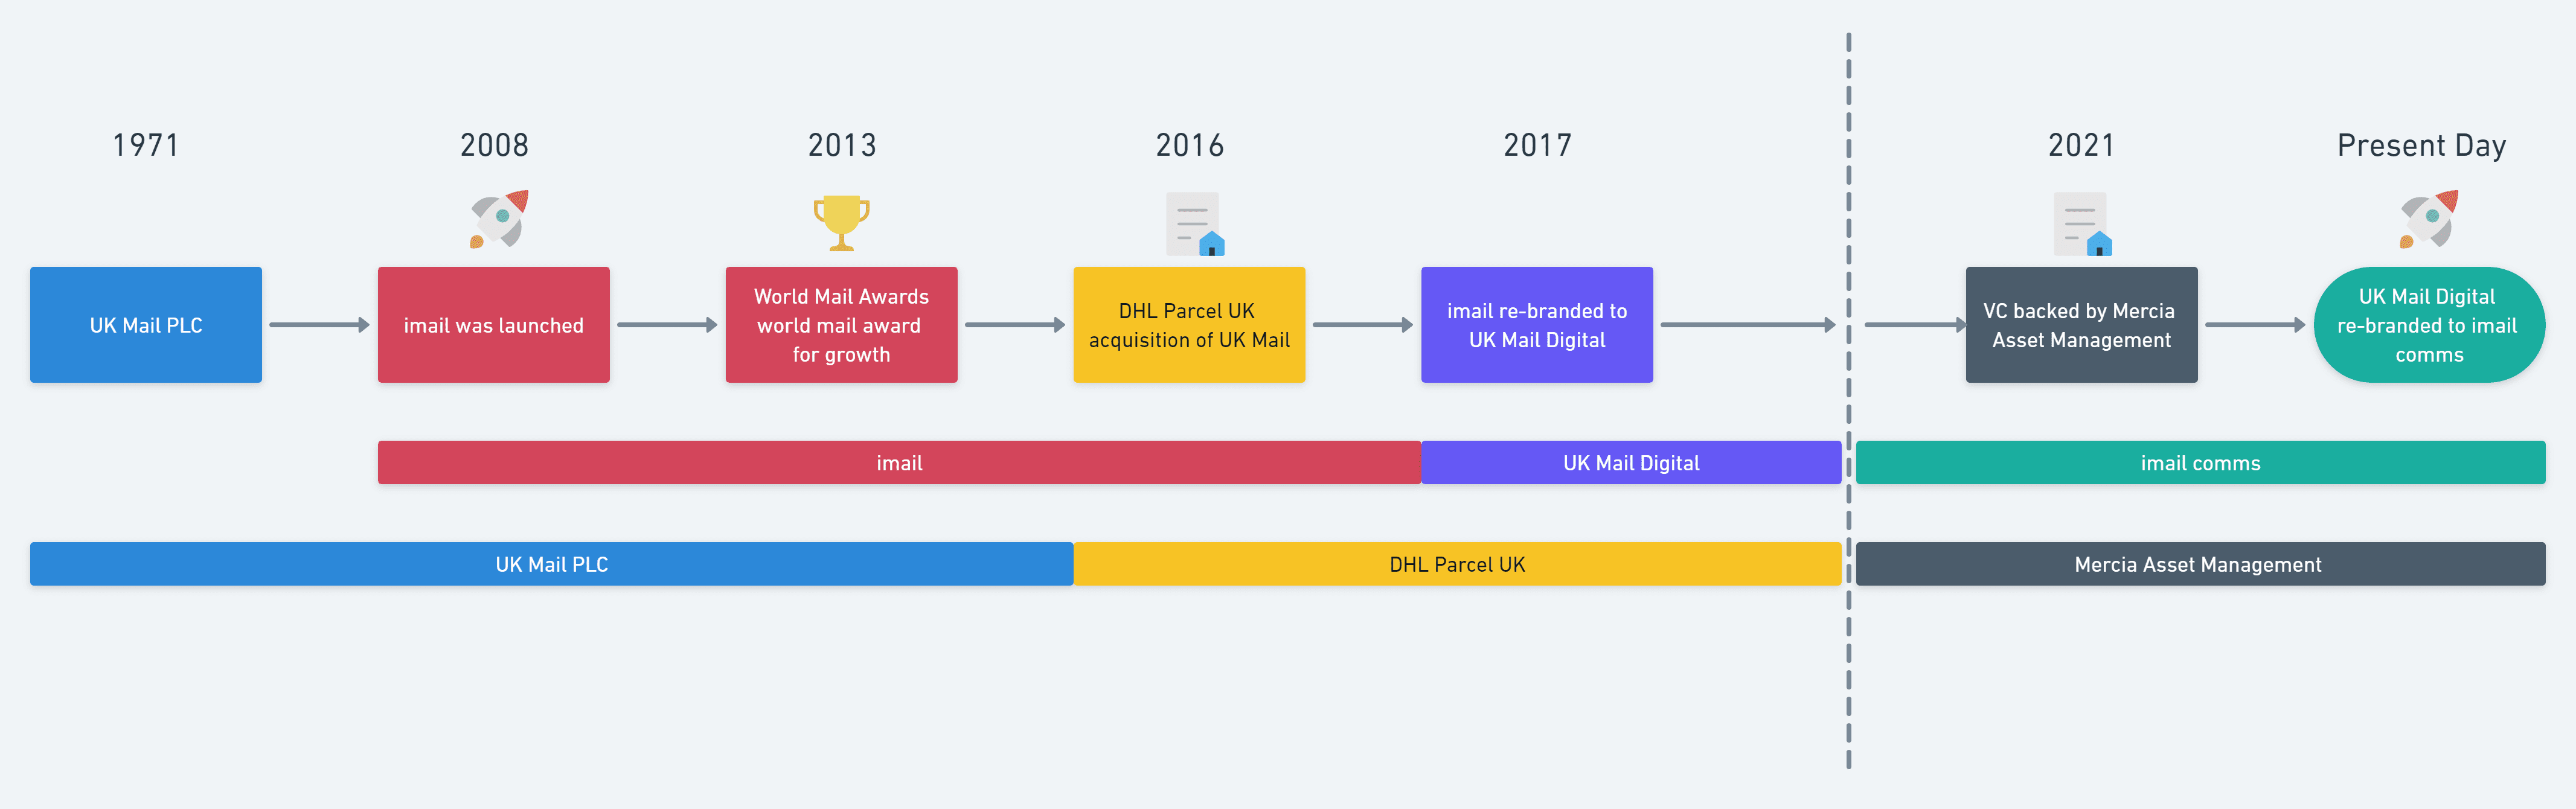 imail comms timeline